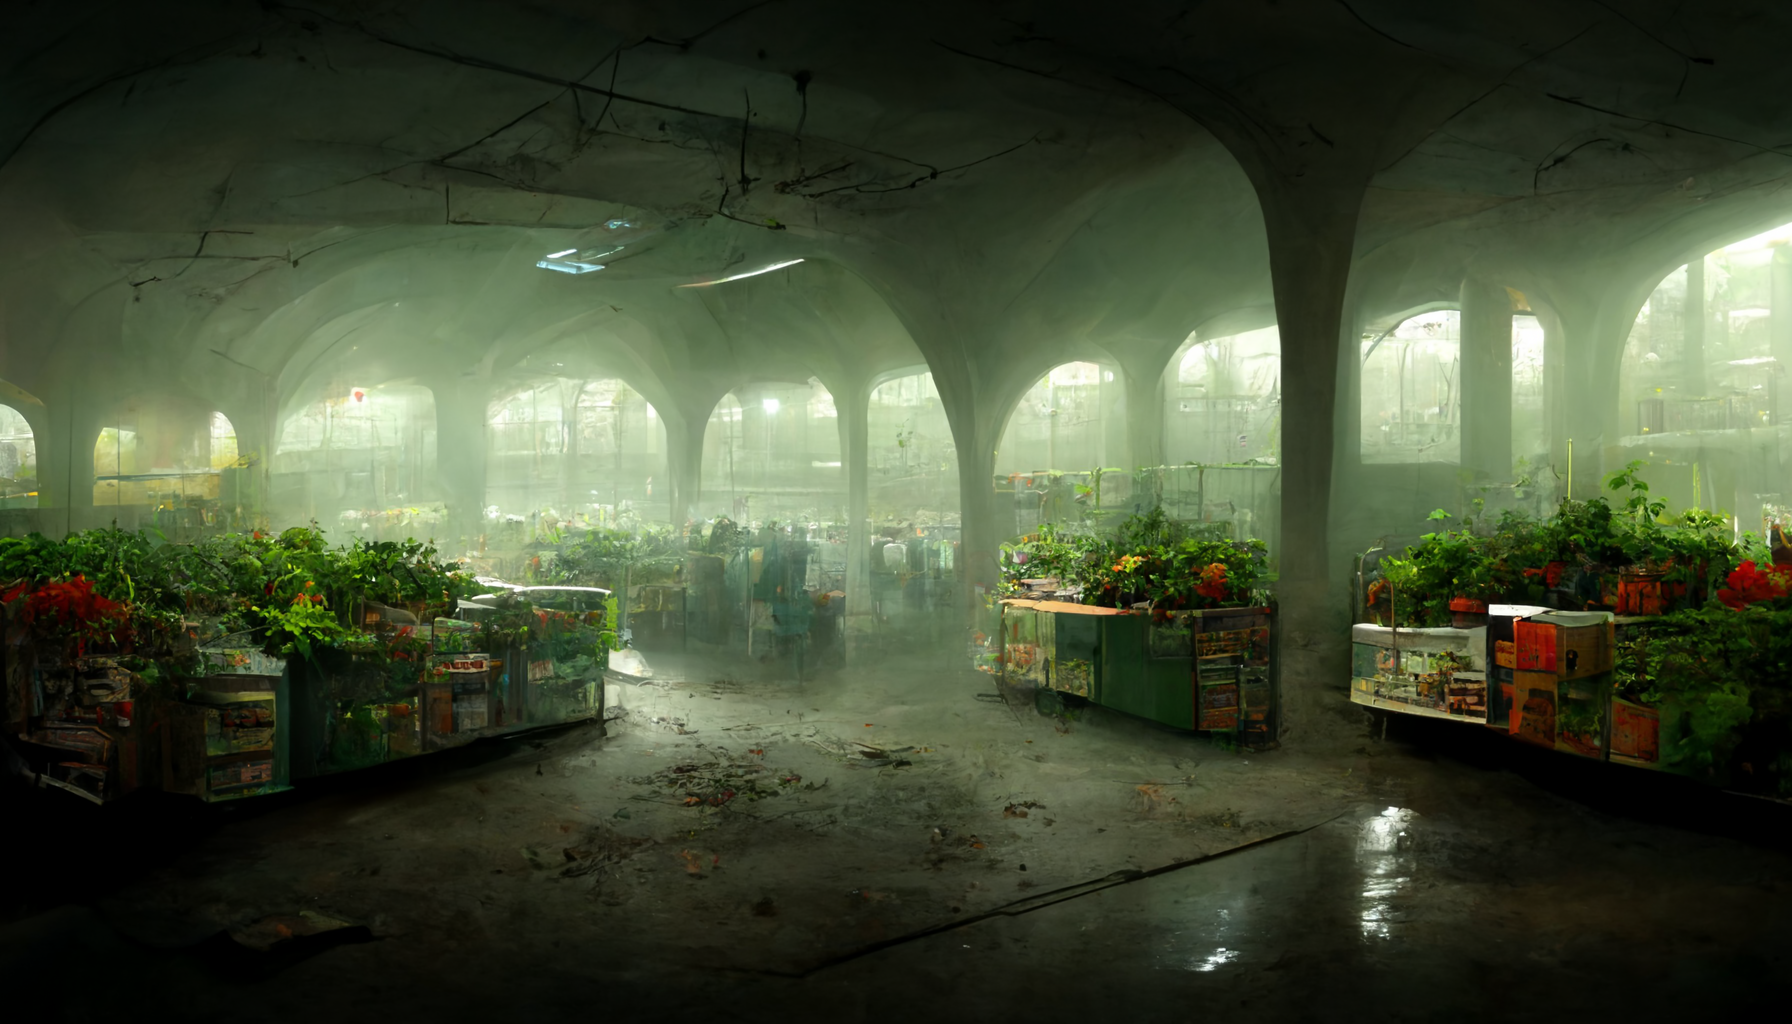 A dark indoor market space, devoid of people. Wide archways show light coming outside. Stalls covered in vegetables and plants are scattered around the area